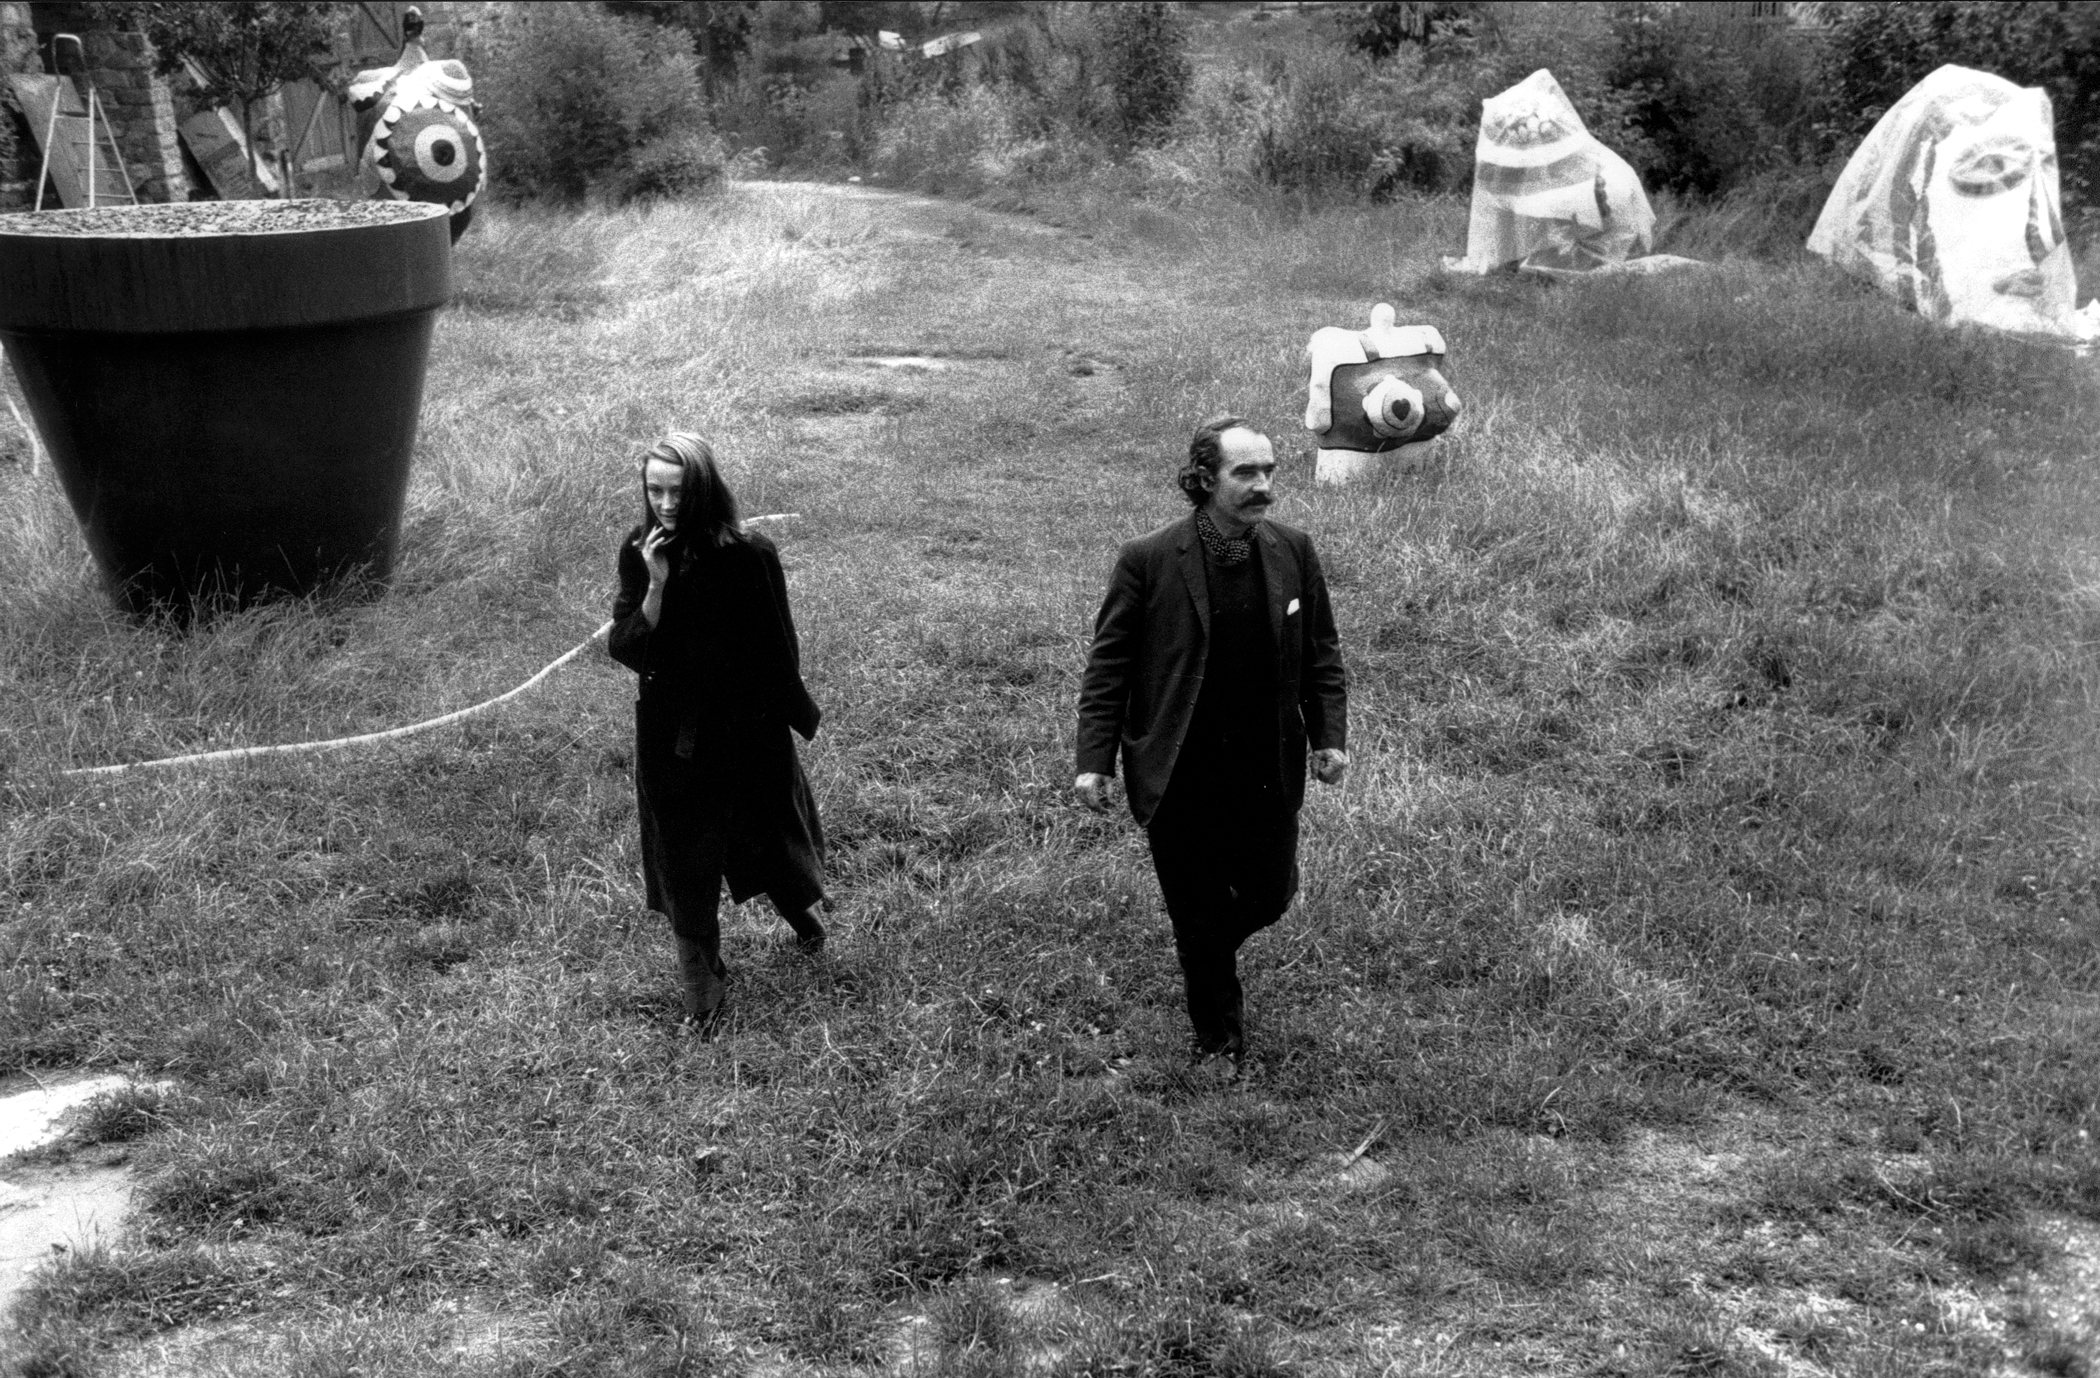 Garden setting with Saint Phalle's sculptures in the background. In the forefront Niki de Saint Phalle and Jean Tinguely walk toward the camera.